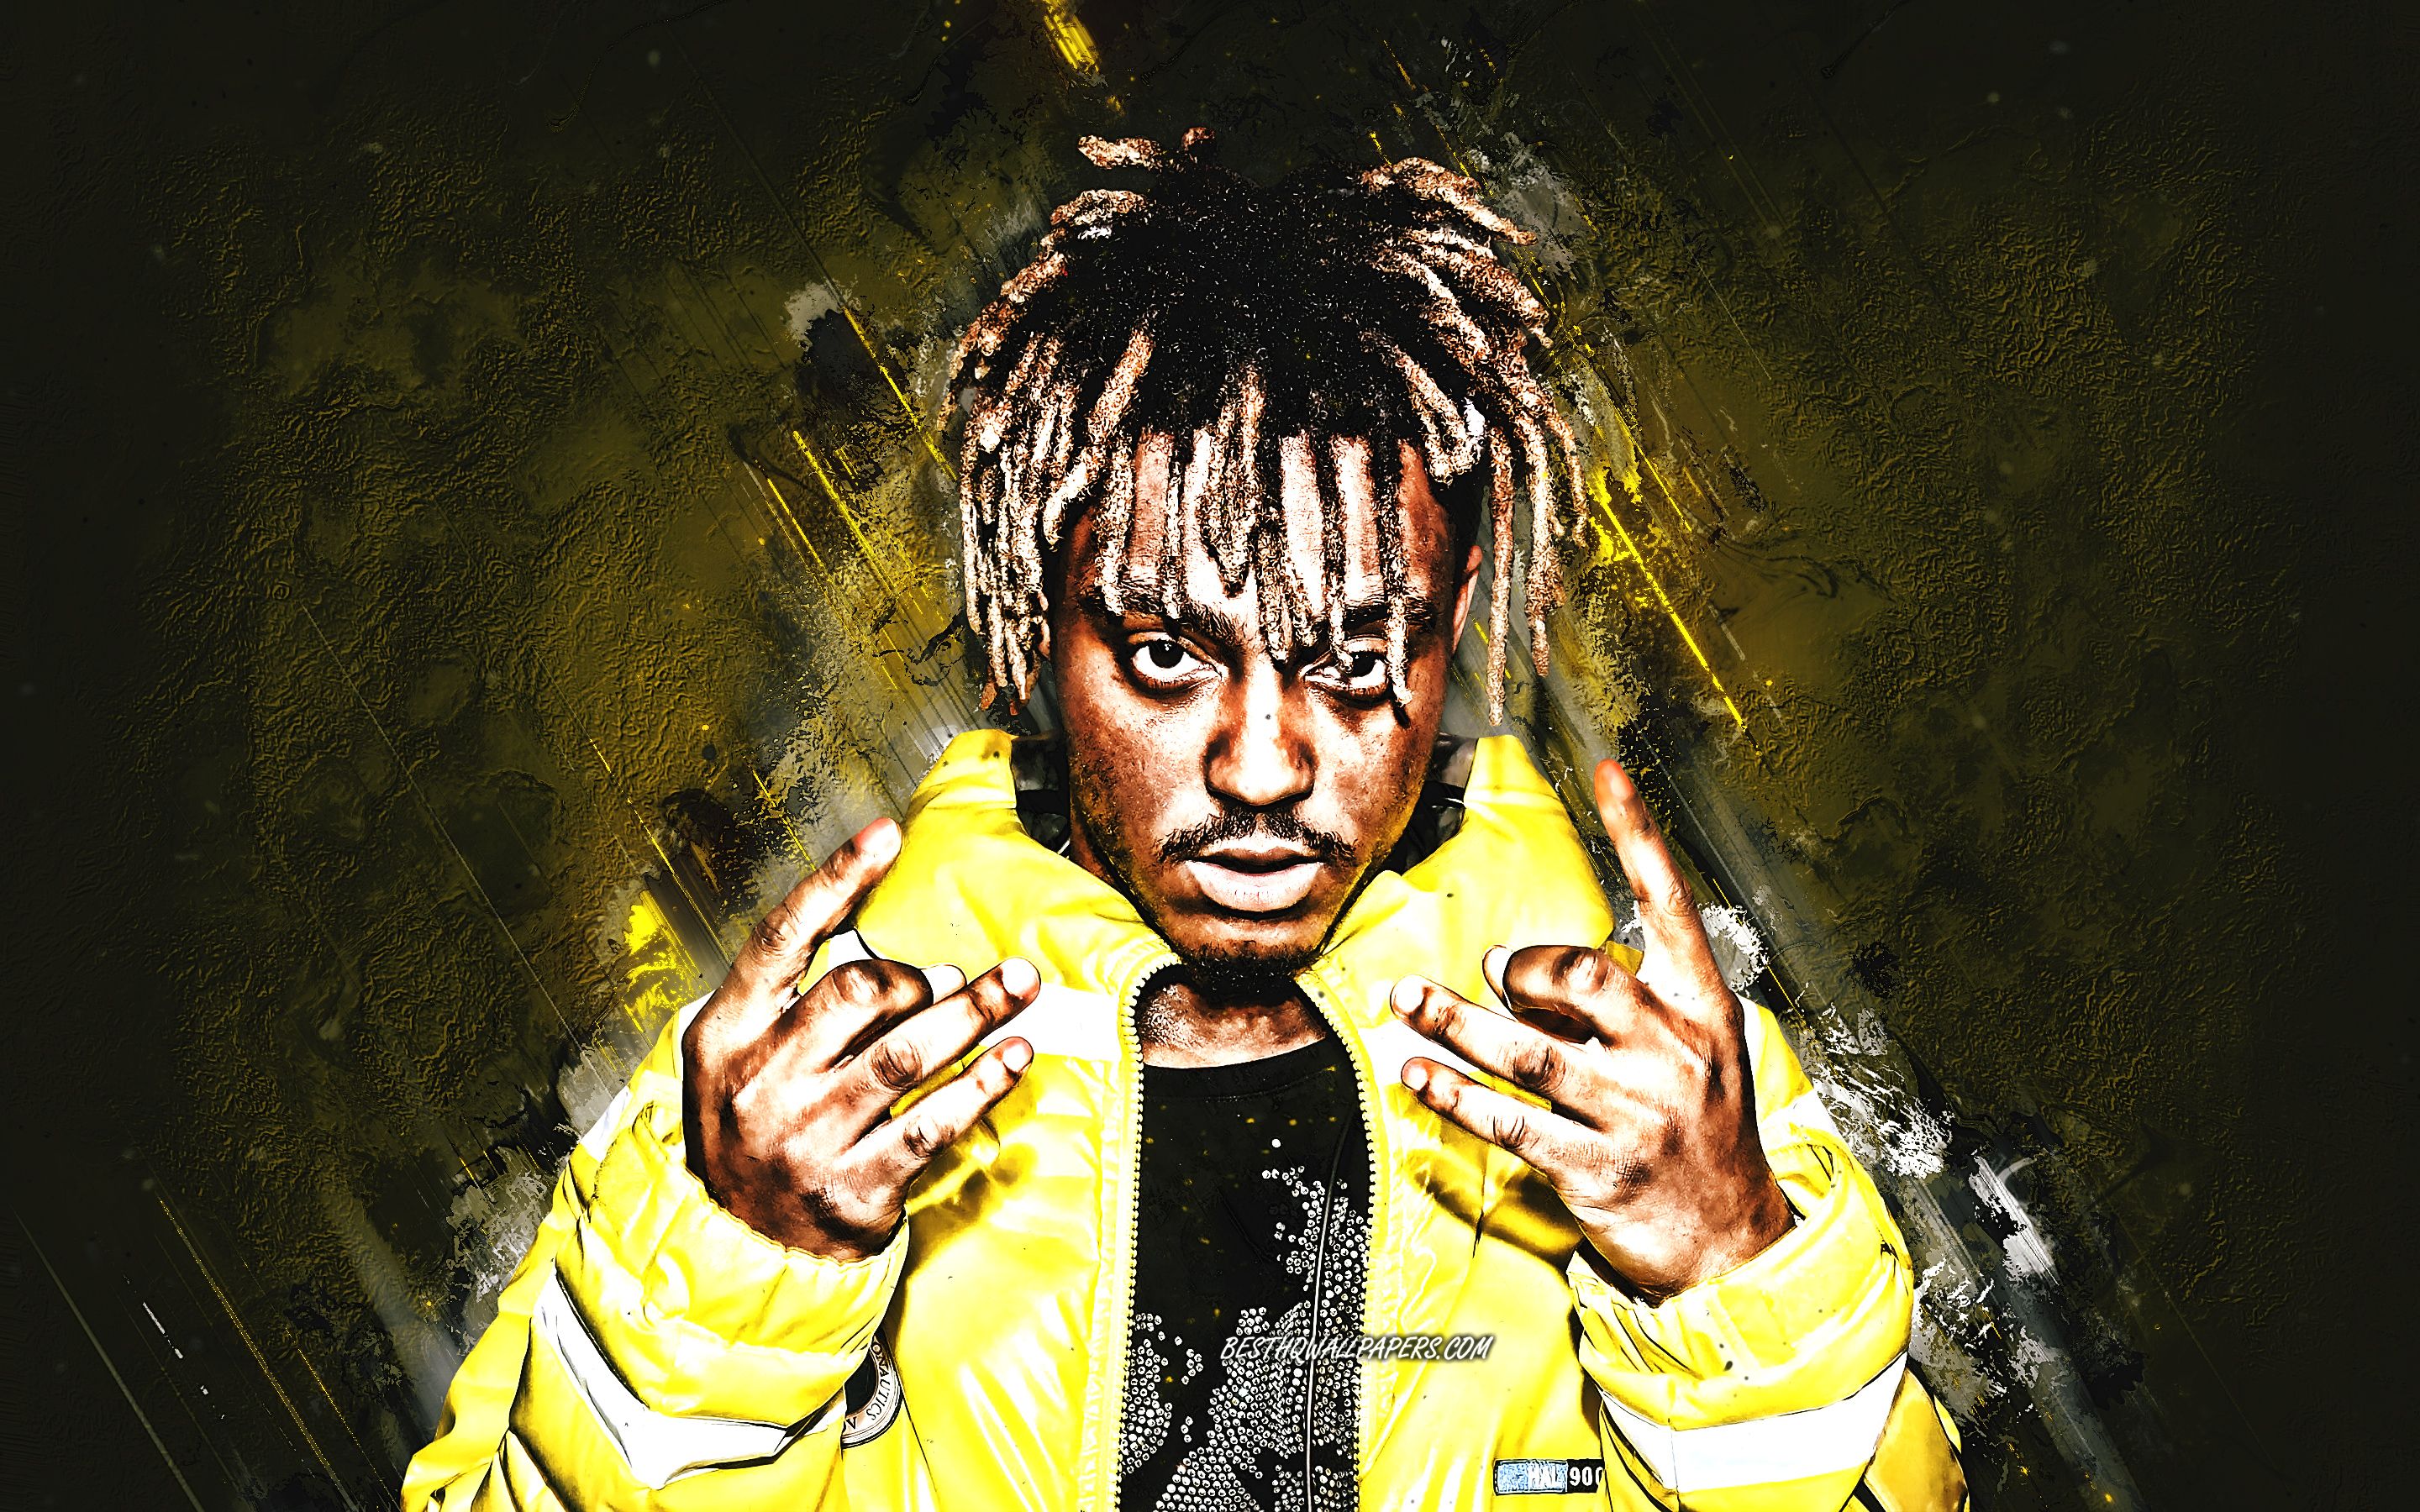 Download wallpaper Juice WRLD, Jarad Anthony Higgins, american rapper, portrait, yellow stone background, popular singers for desktop with resolution 2880x1800. High Quality HD picture wallpaper